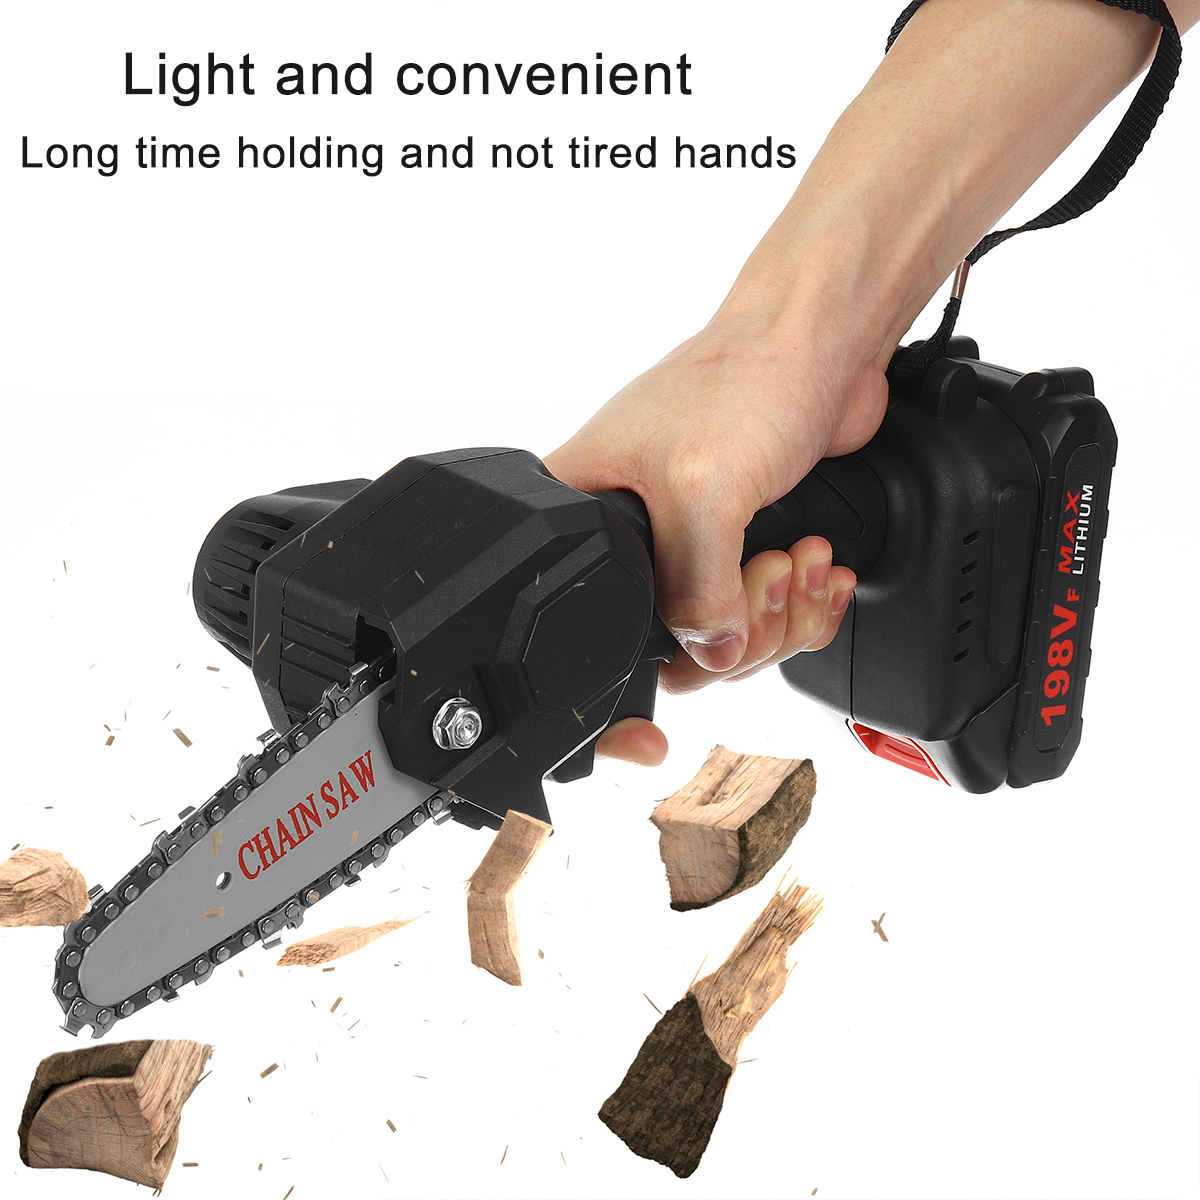 21V-4-Inch-600W-Electric-Chain-Saw-Handheld-Cordless-Rechargeable-Portable-Woodworking-Saw-W-012pcs--1807522-3